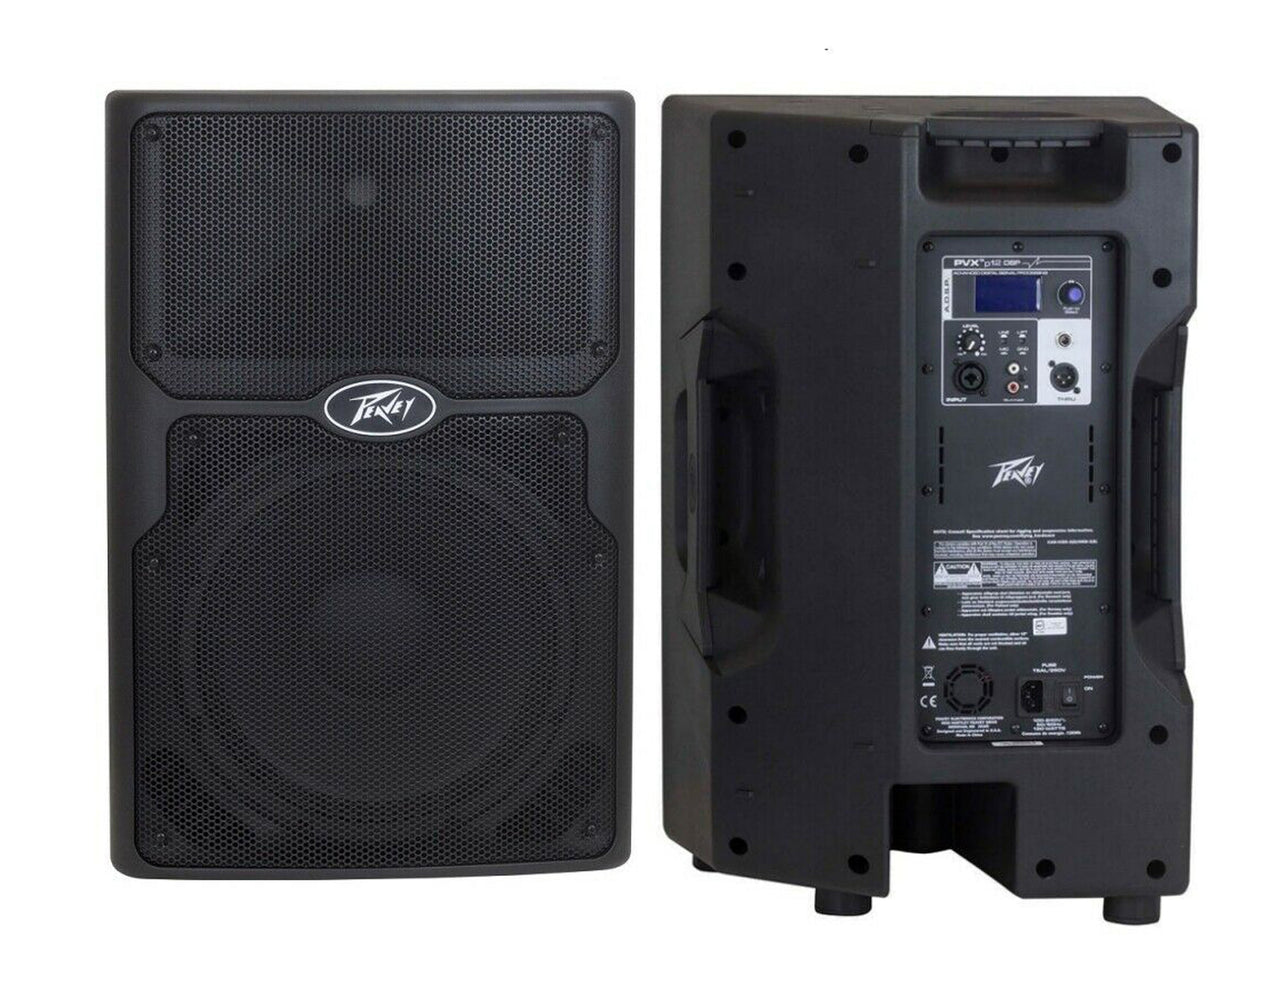 Peavey PVXP12 DSP 12 inch Powered Speaker 830W 12" Powered Speaker with 1.4" Compression Driver,+ Free Mr. Dj Speaker Stand